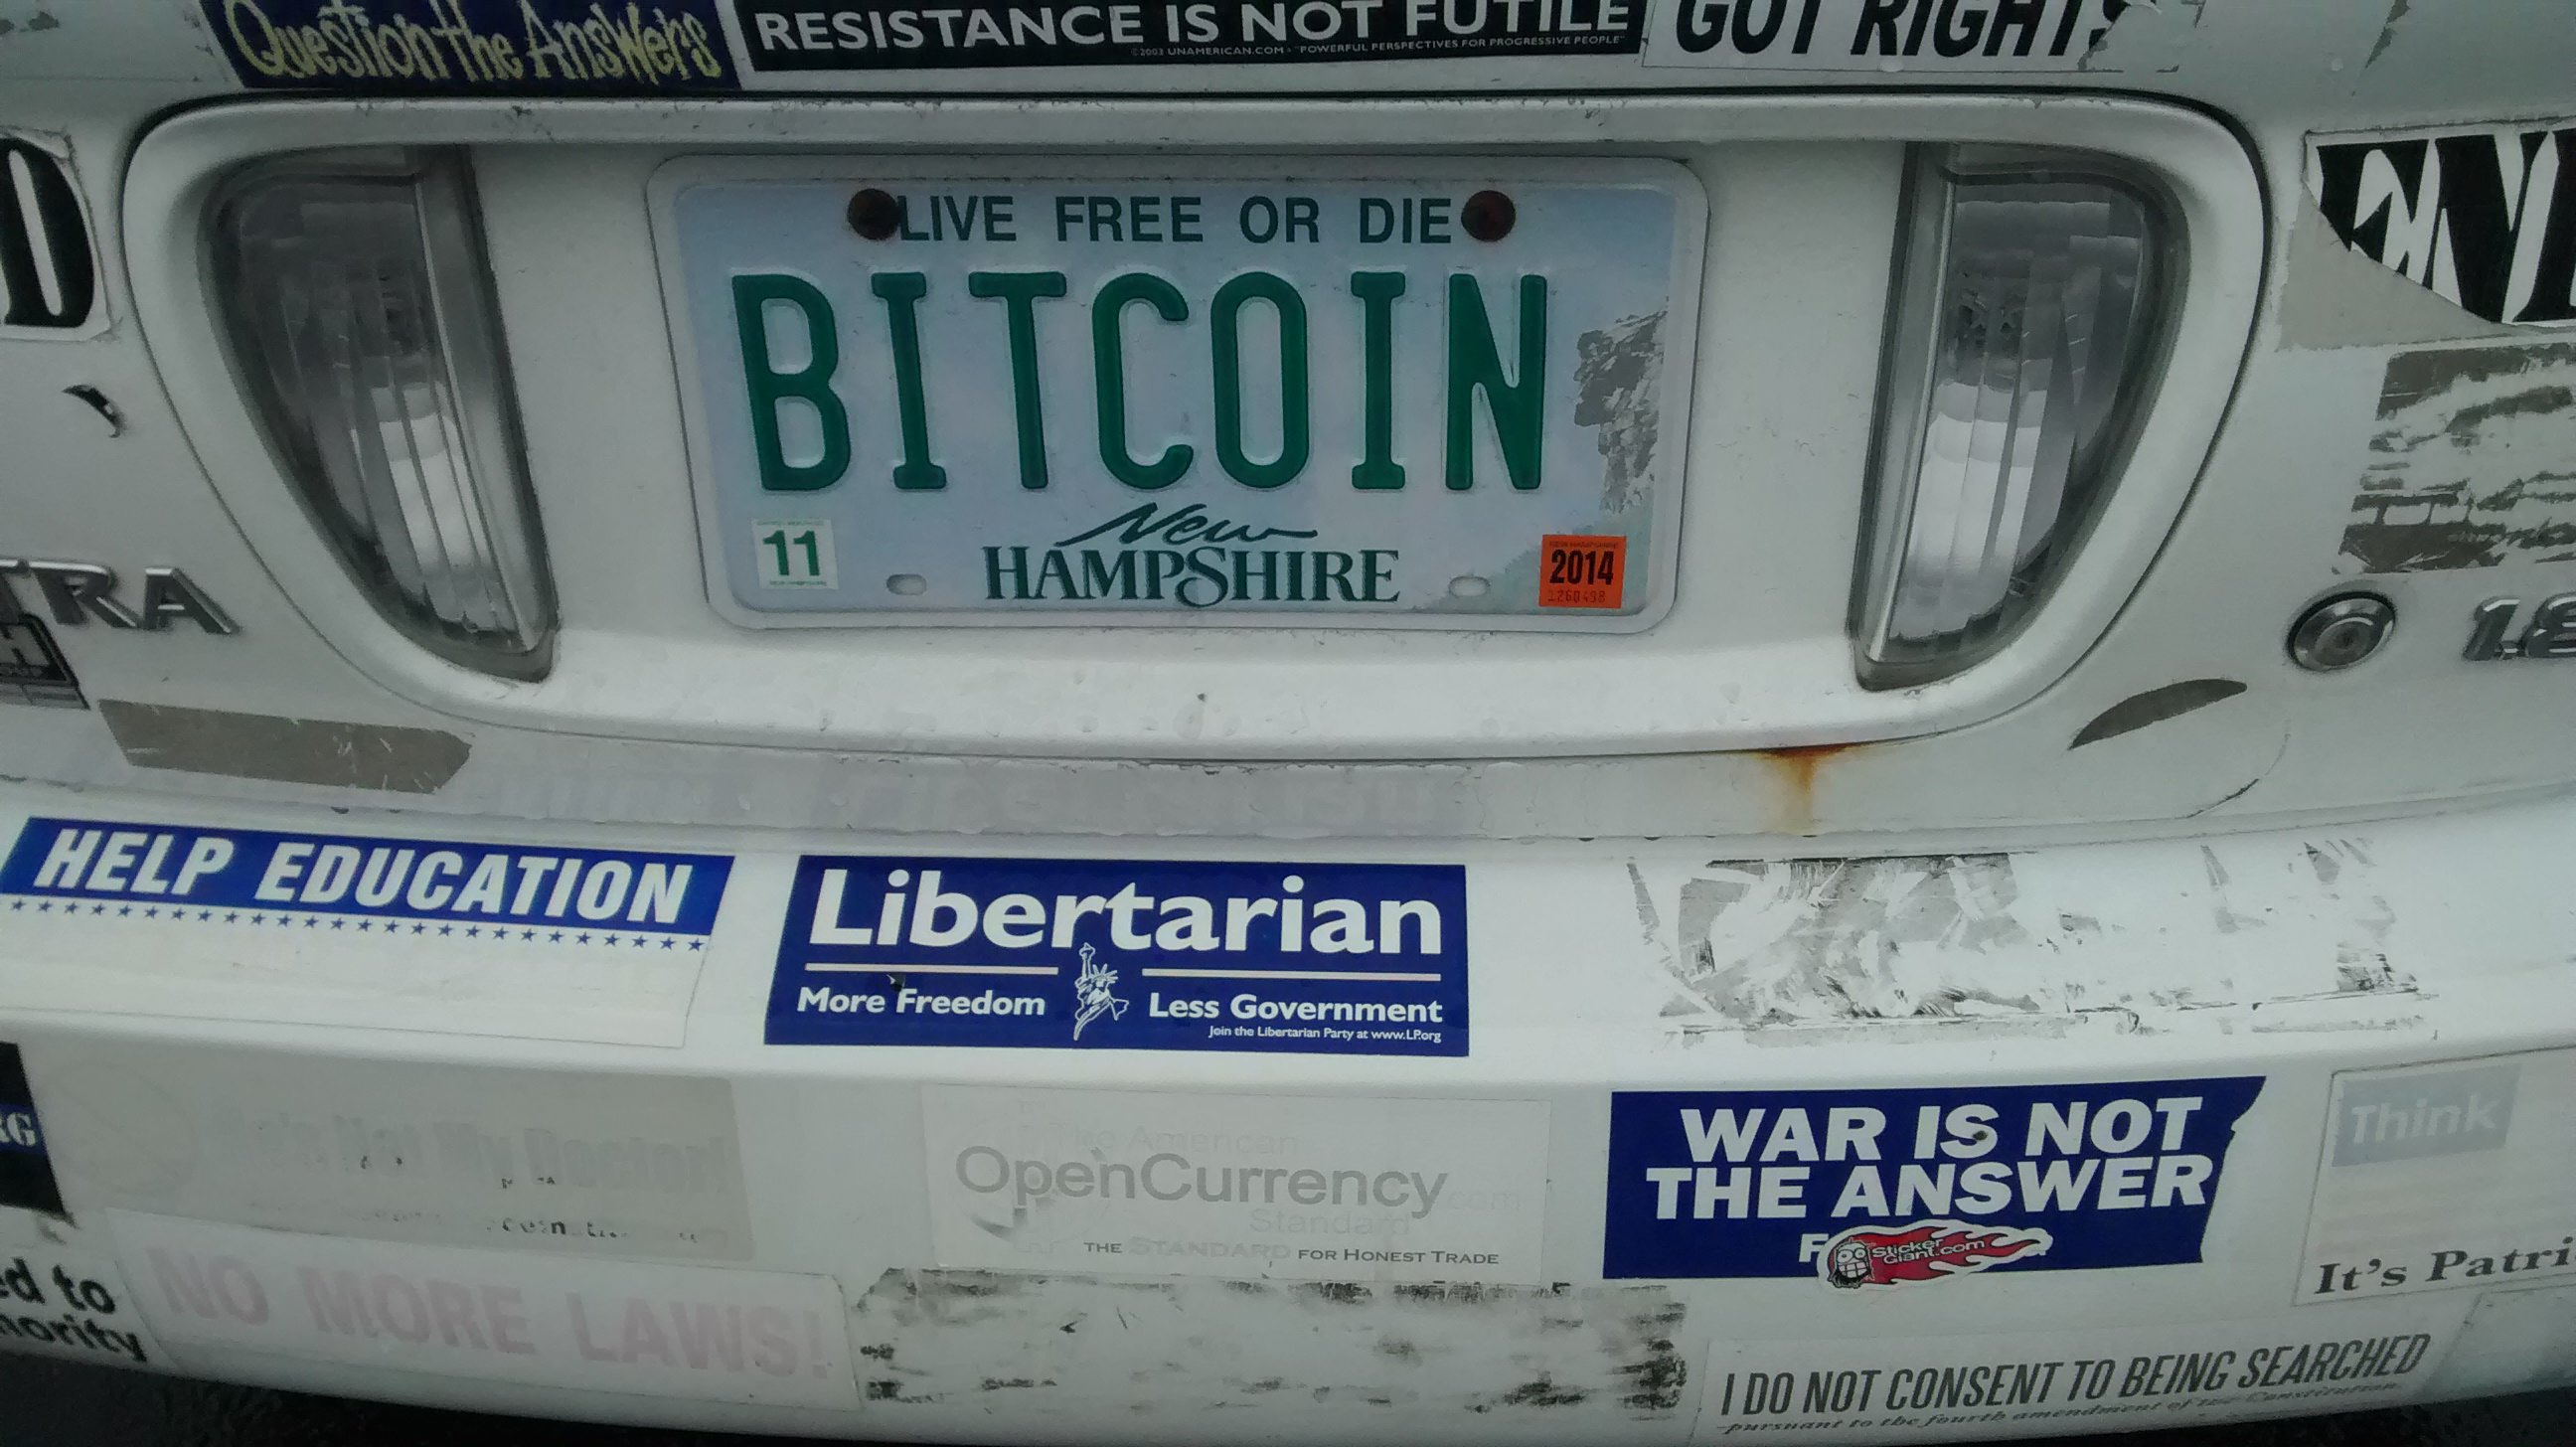 Keene New Hampshire Is Not Only a Libertarian Enclave - It's Also a Crypto Mecca